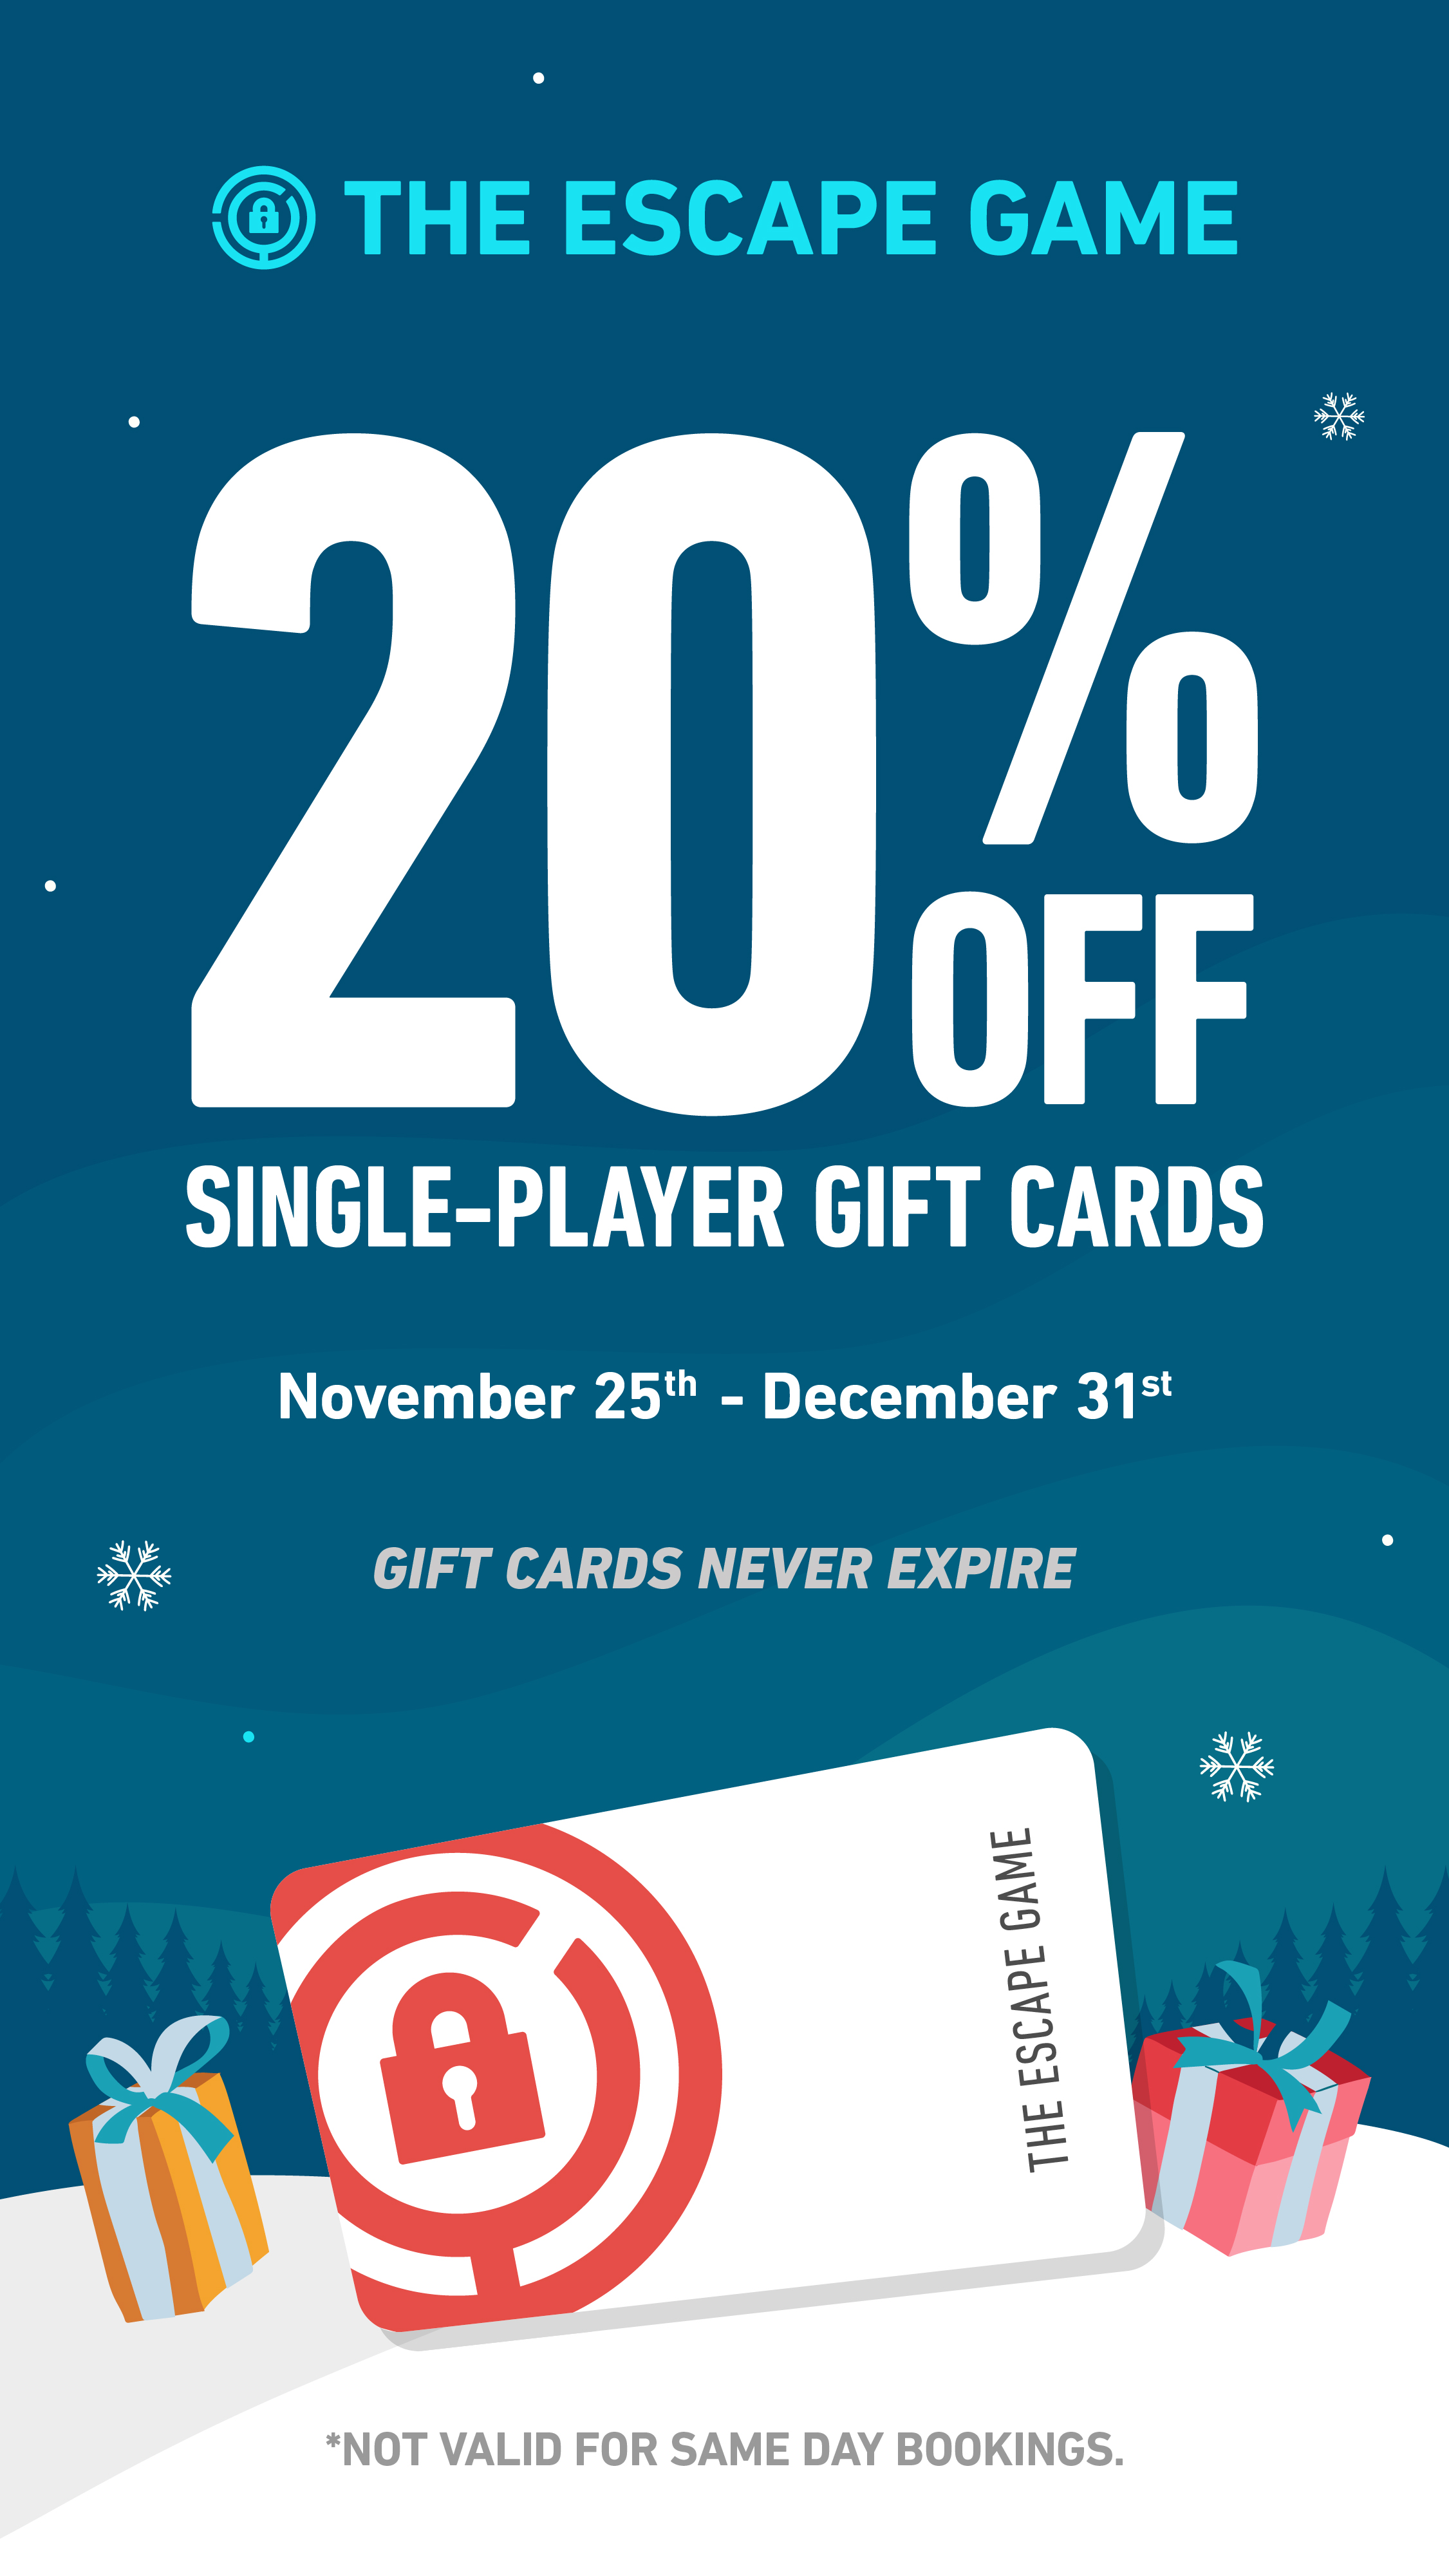 The Escape Game Single-Player Gift Card Sales from The Escape Game